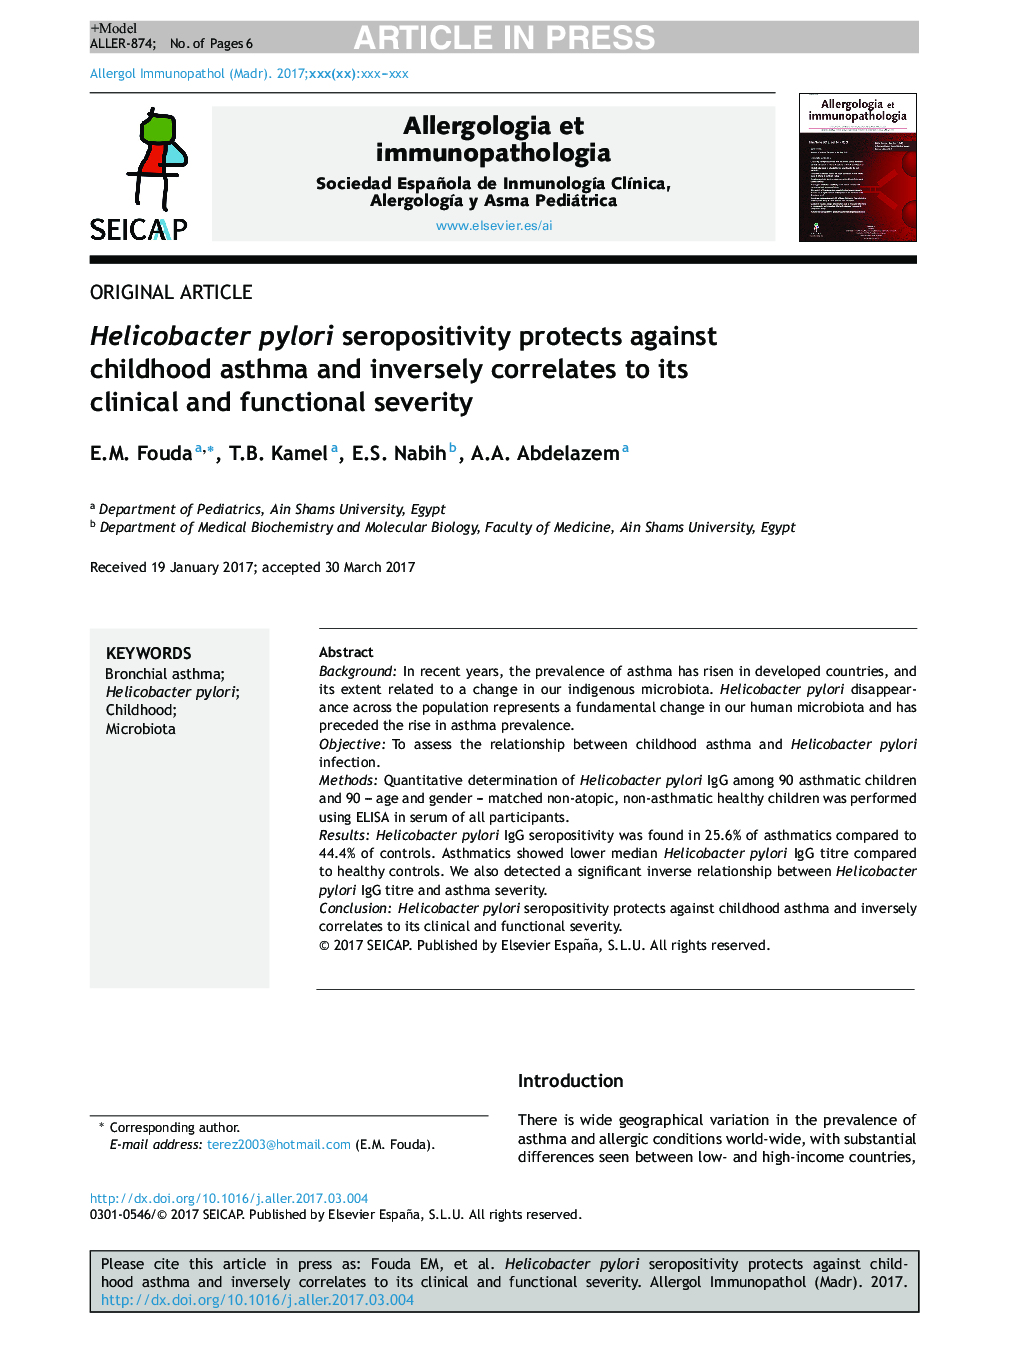 Helicobacter pylori seropositivity protects against childhood asthma and inversely correlates to its clinical and functional severity